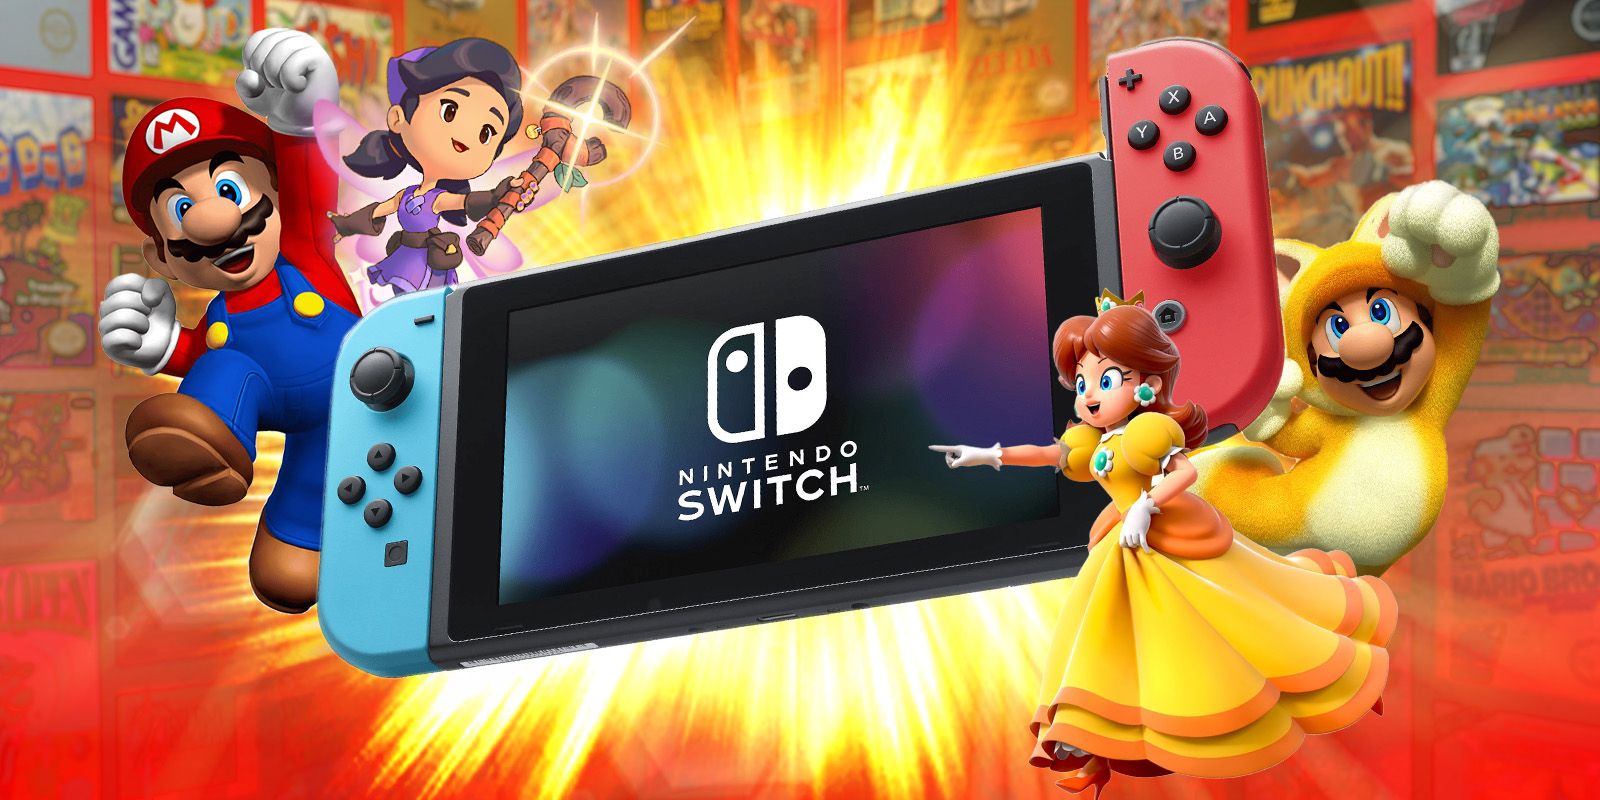 Mark Your Calendars: February's Nintendo Direct Coming Very Soon, Says Leak